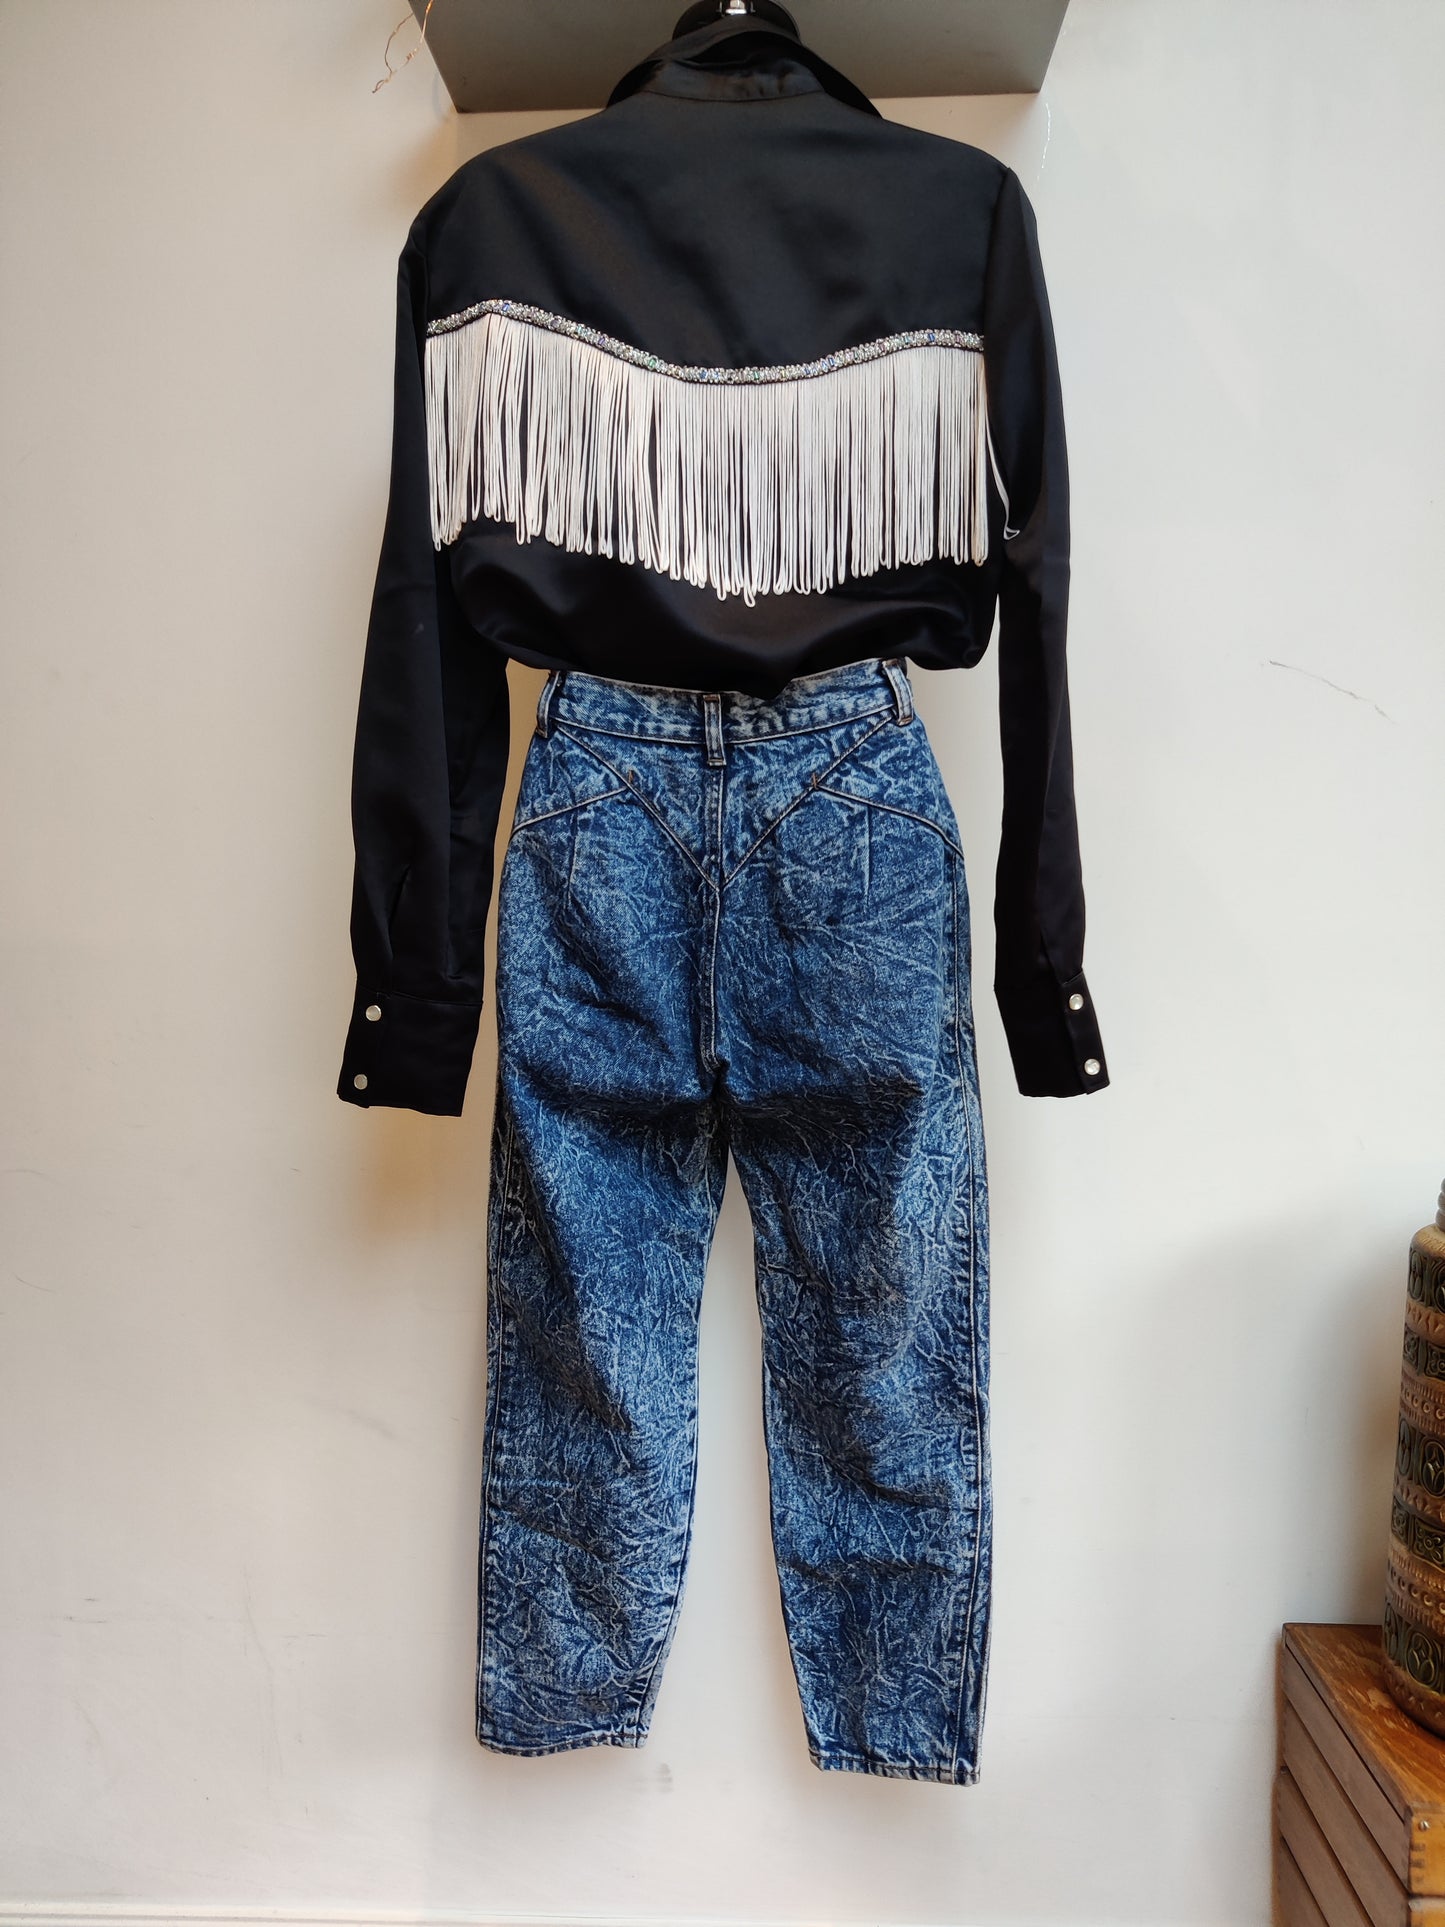 Incredible 80s high waisted mum jeans size 6-8